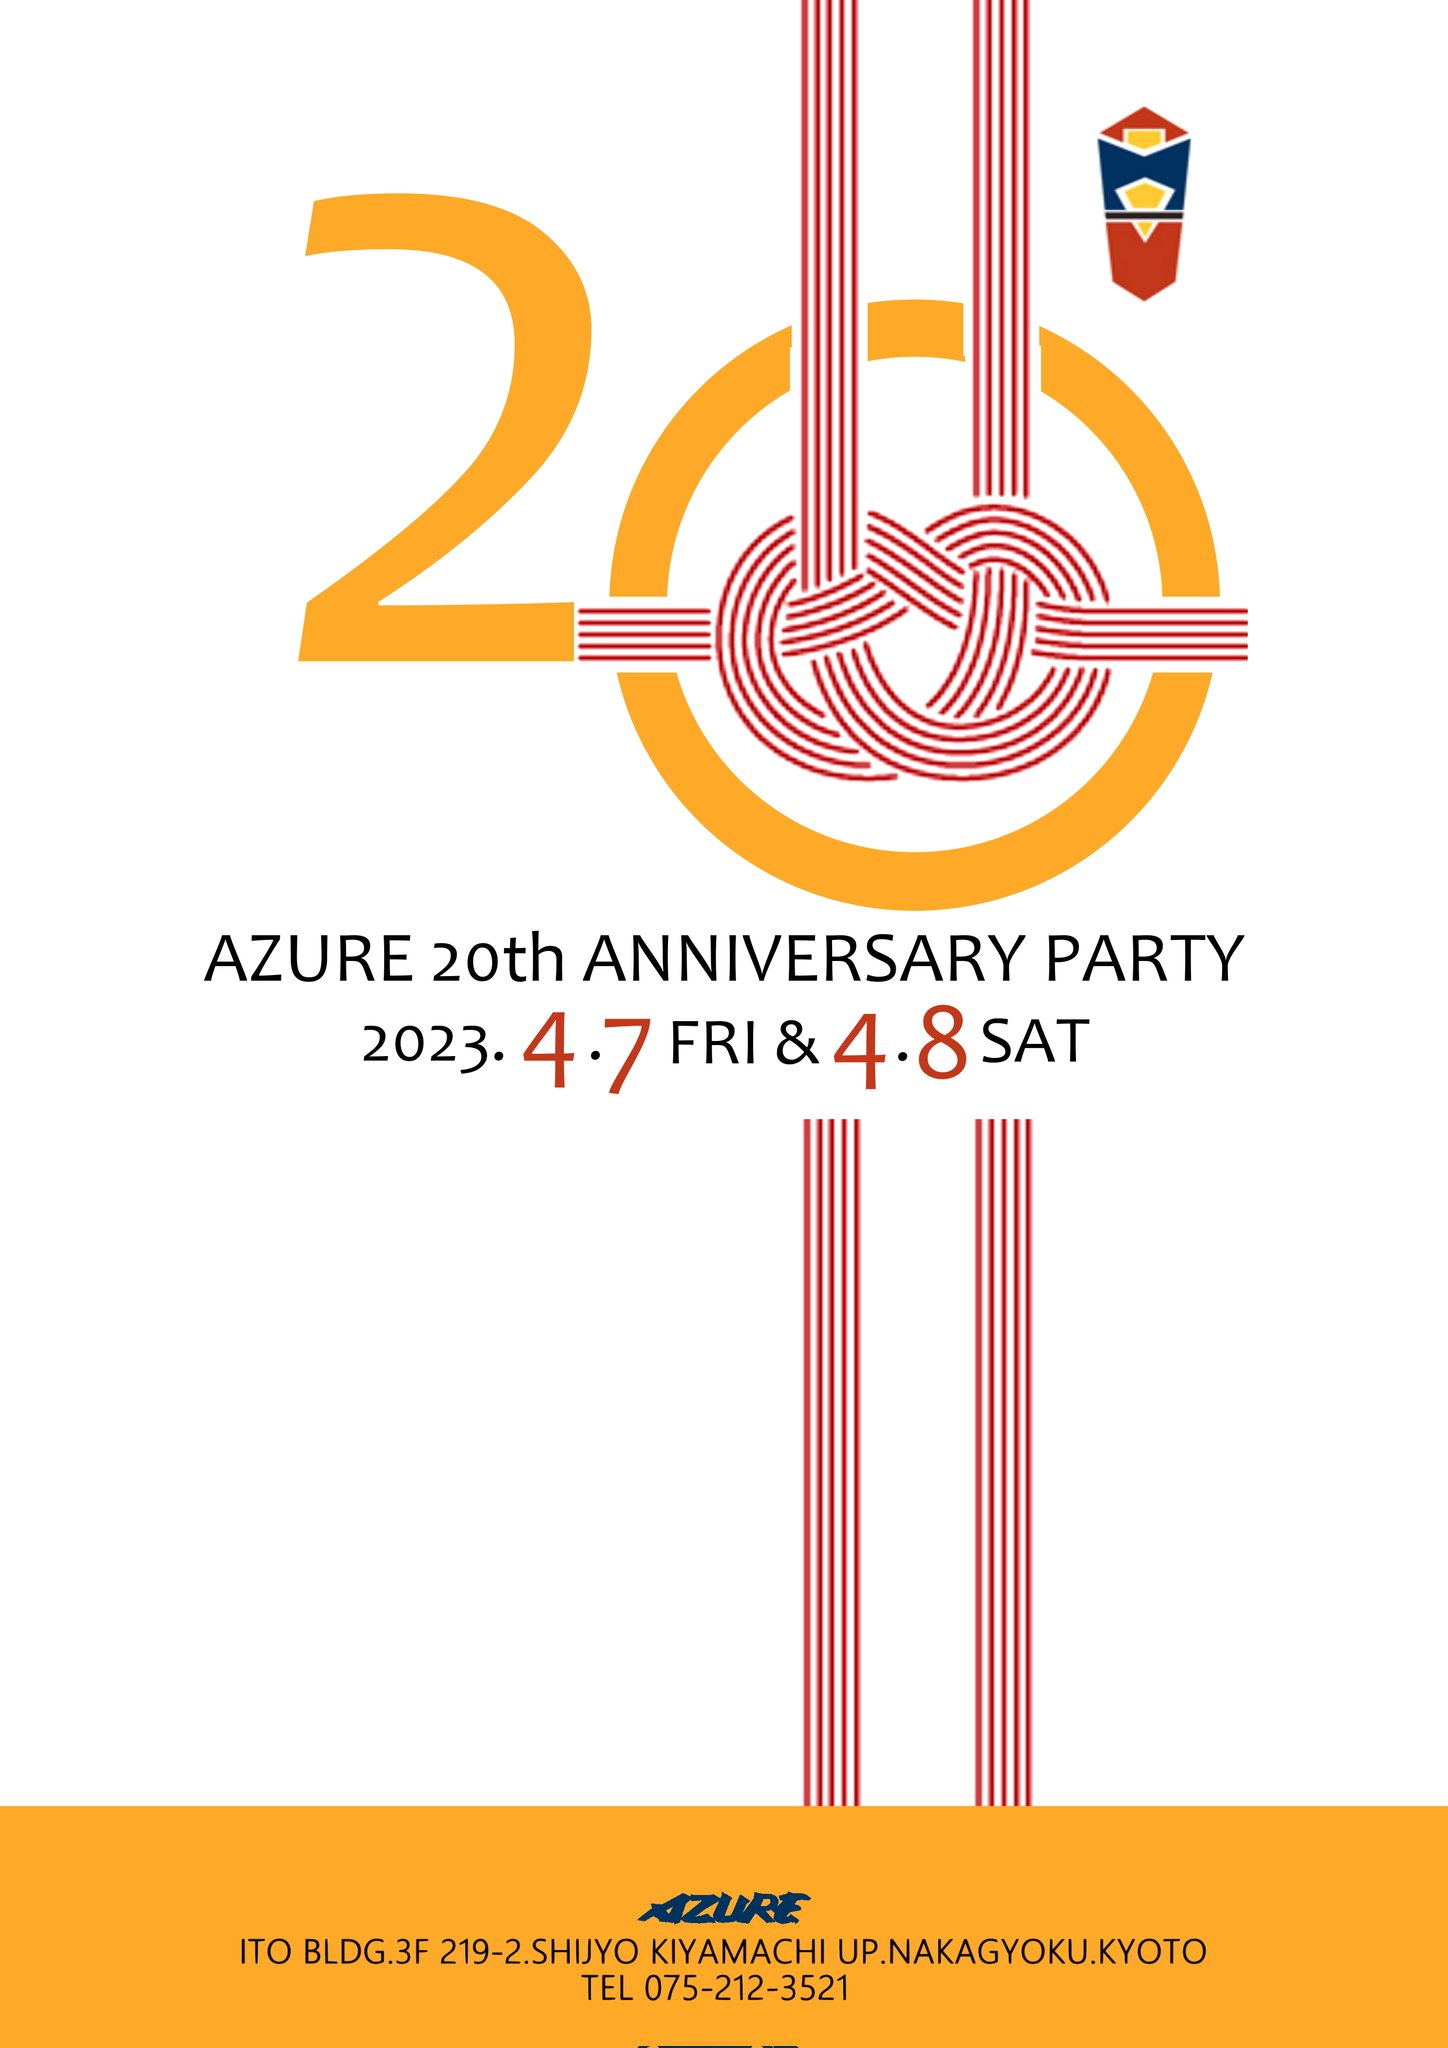 AZURE 20th ANNIVERSARY PARTY